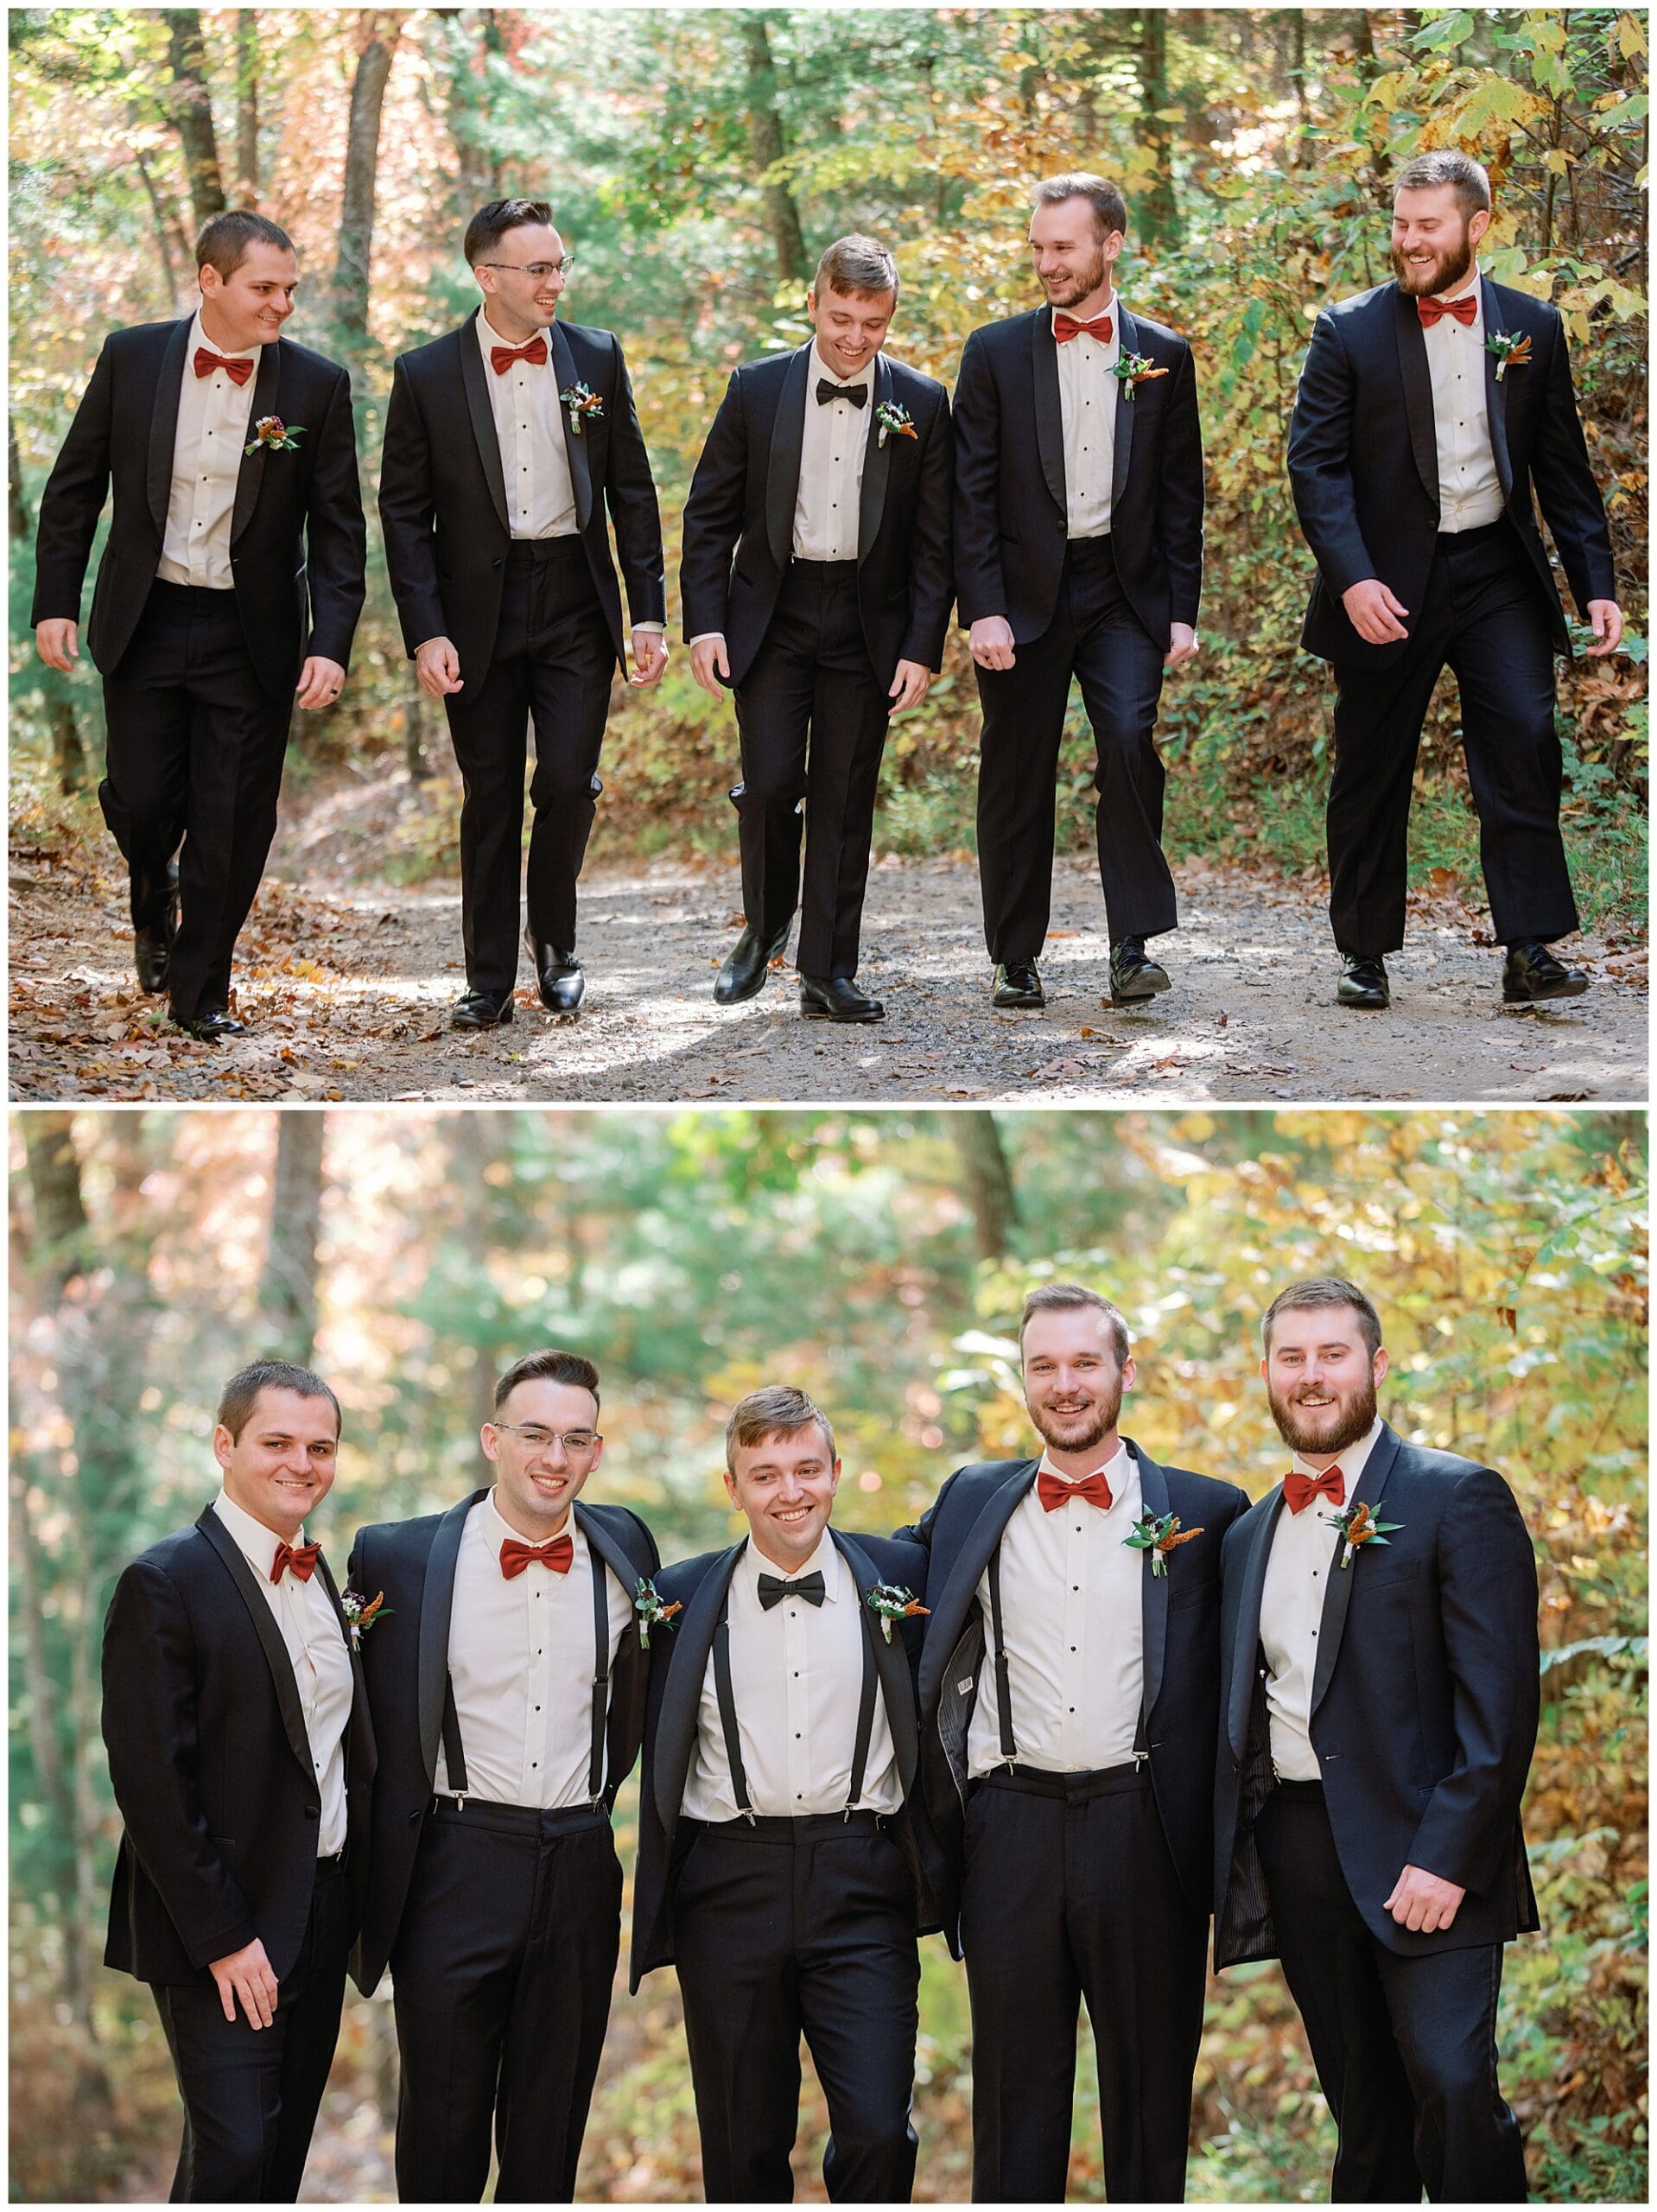 Five men in tuxedos with bow ties and boutonnieres, walking together and smiling in a wooded area.